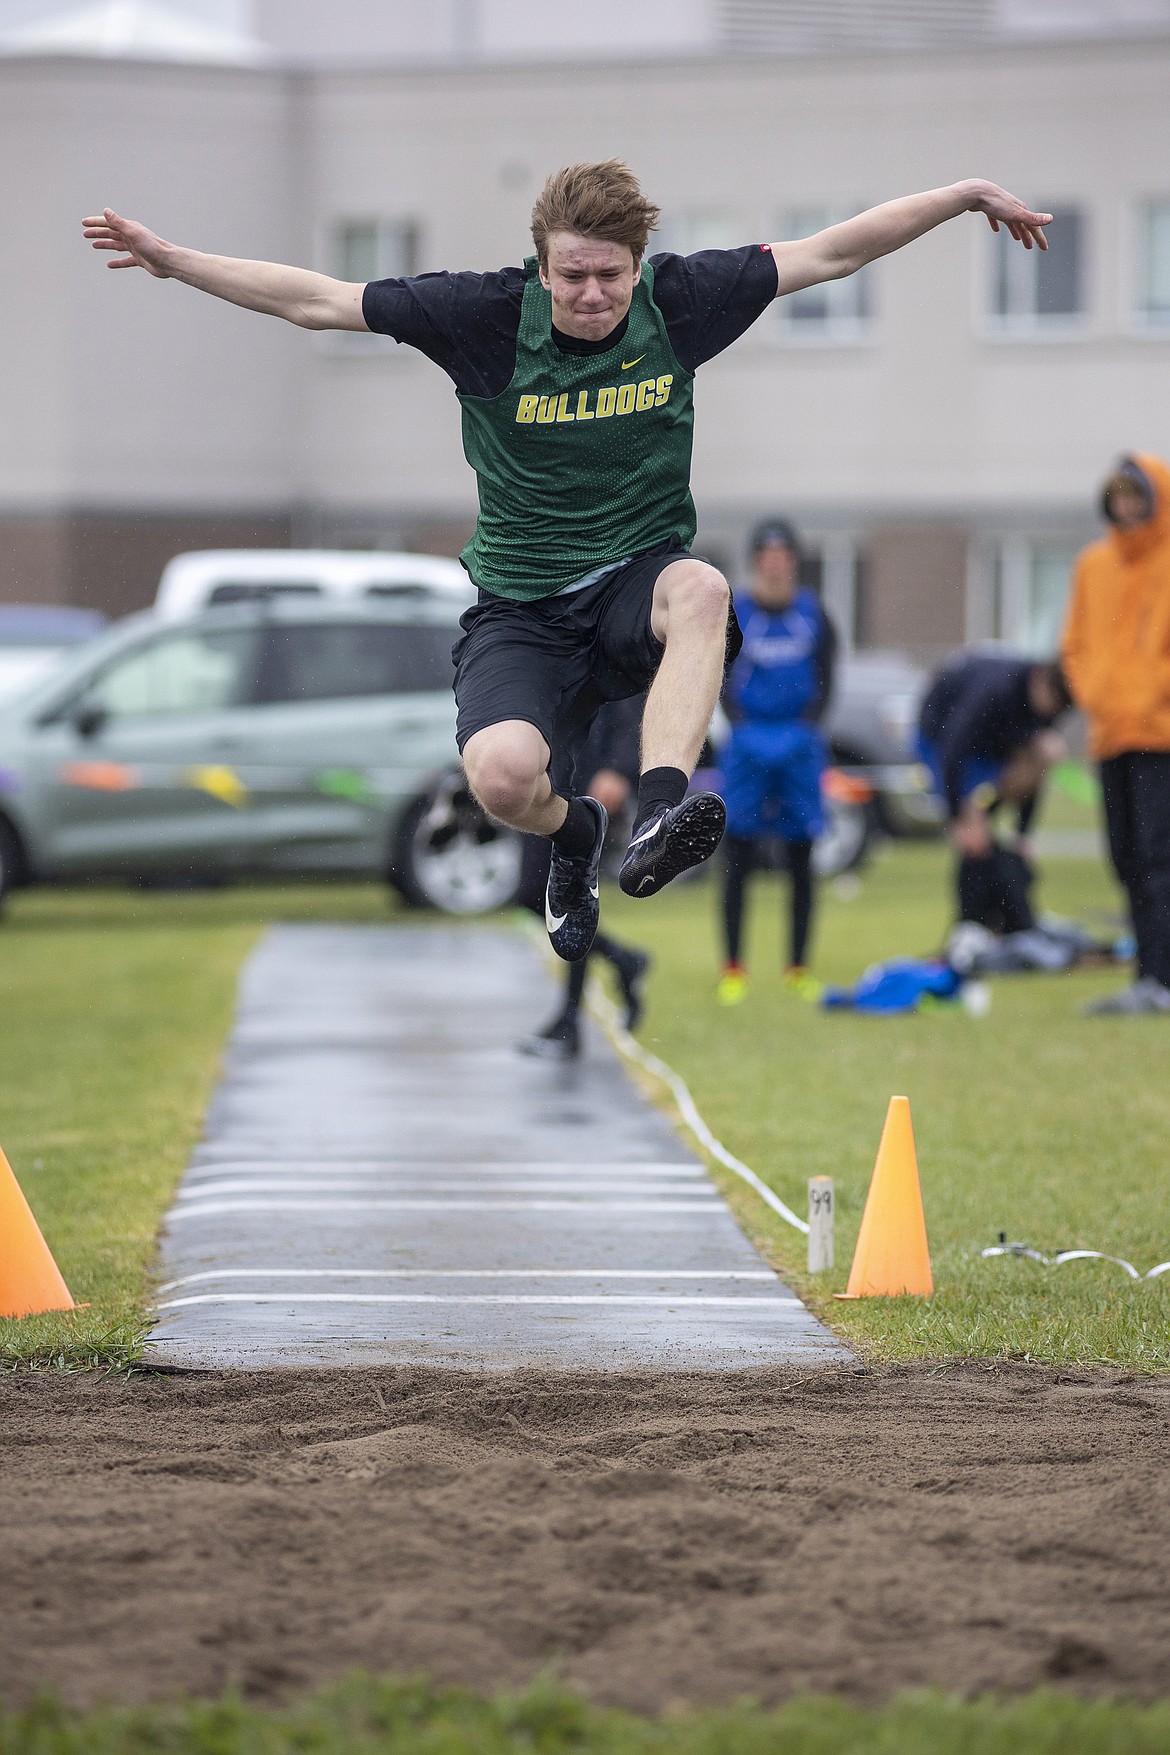 Whitefish's Wyatt Kaszuba competes in the boys long jump event at the Columbia Falls Invite on Saturday. (Chris Peterson/Hungry Horse News)